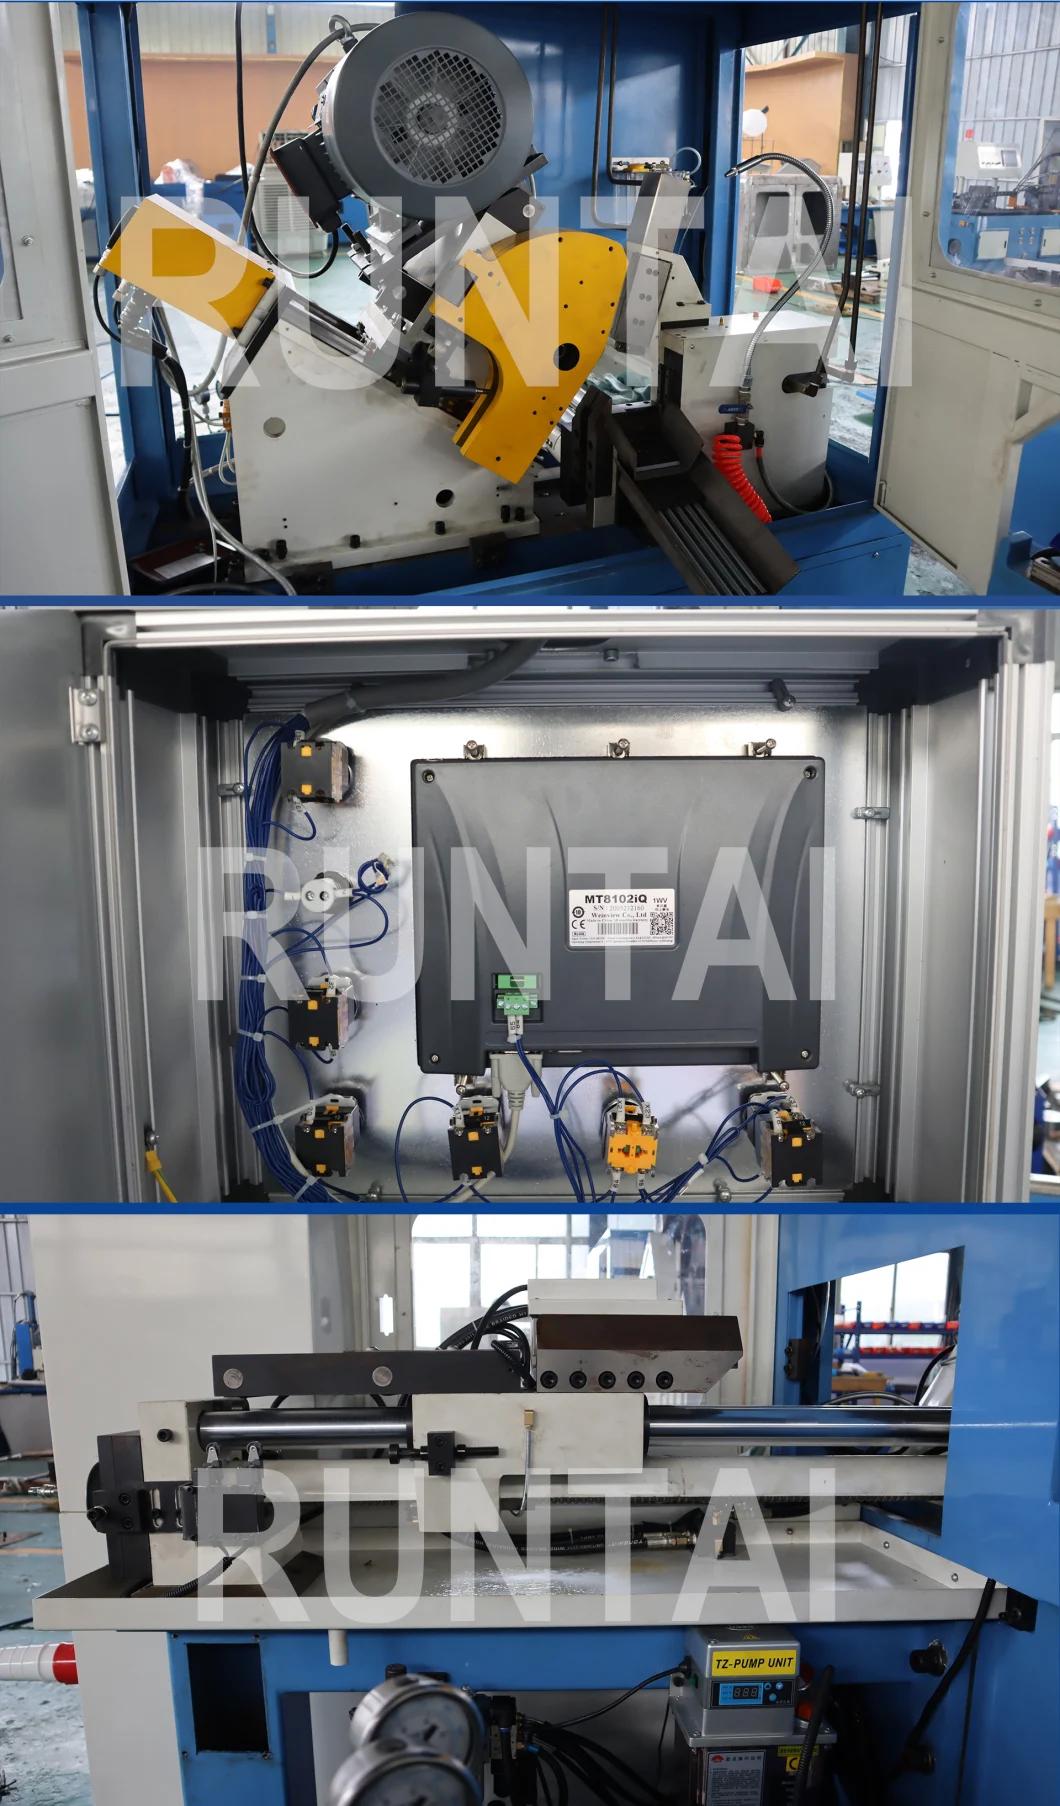 Rt-120cx Upper and Down Clamping Metal Cutting Machine Circular Sawing Machines Copper Tube